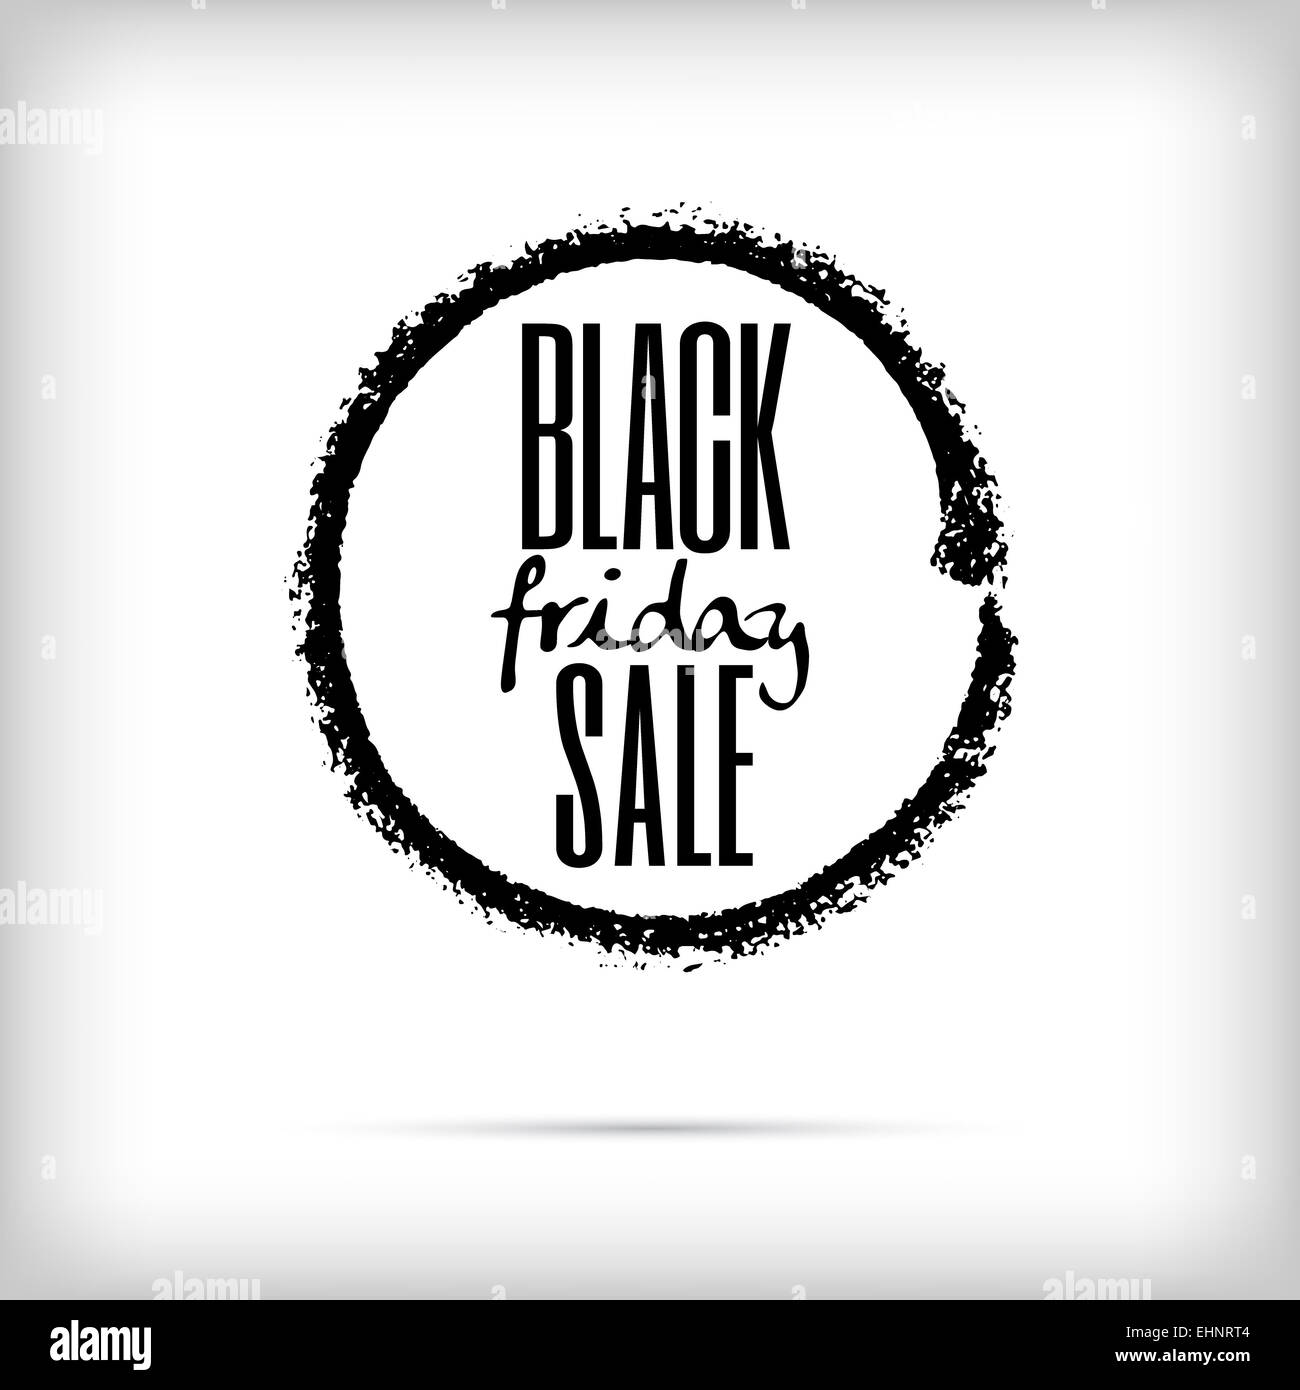 Black friday sales announcement in black charcoal frame Stock Photo